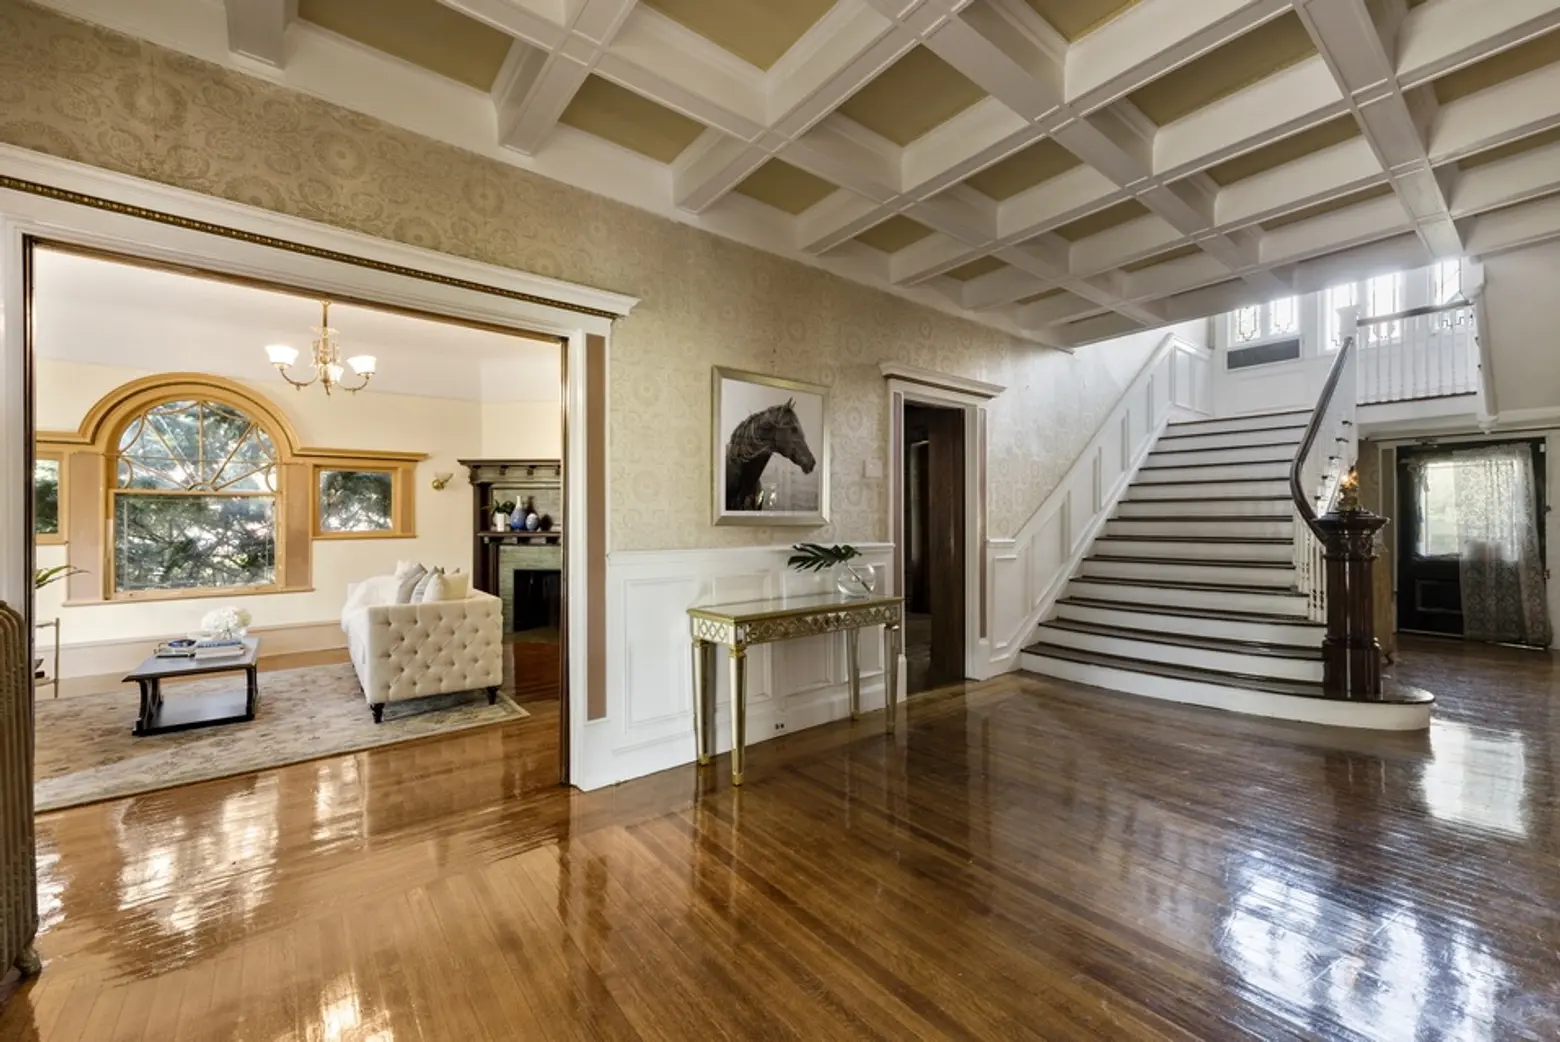 1305 Albermarle Road, Prospect Park South, Michelle Williams, Brooklyn, Brooklyn Townhouse, Historic Home, Townhouses, Record Brooklyn Prices